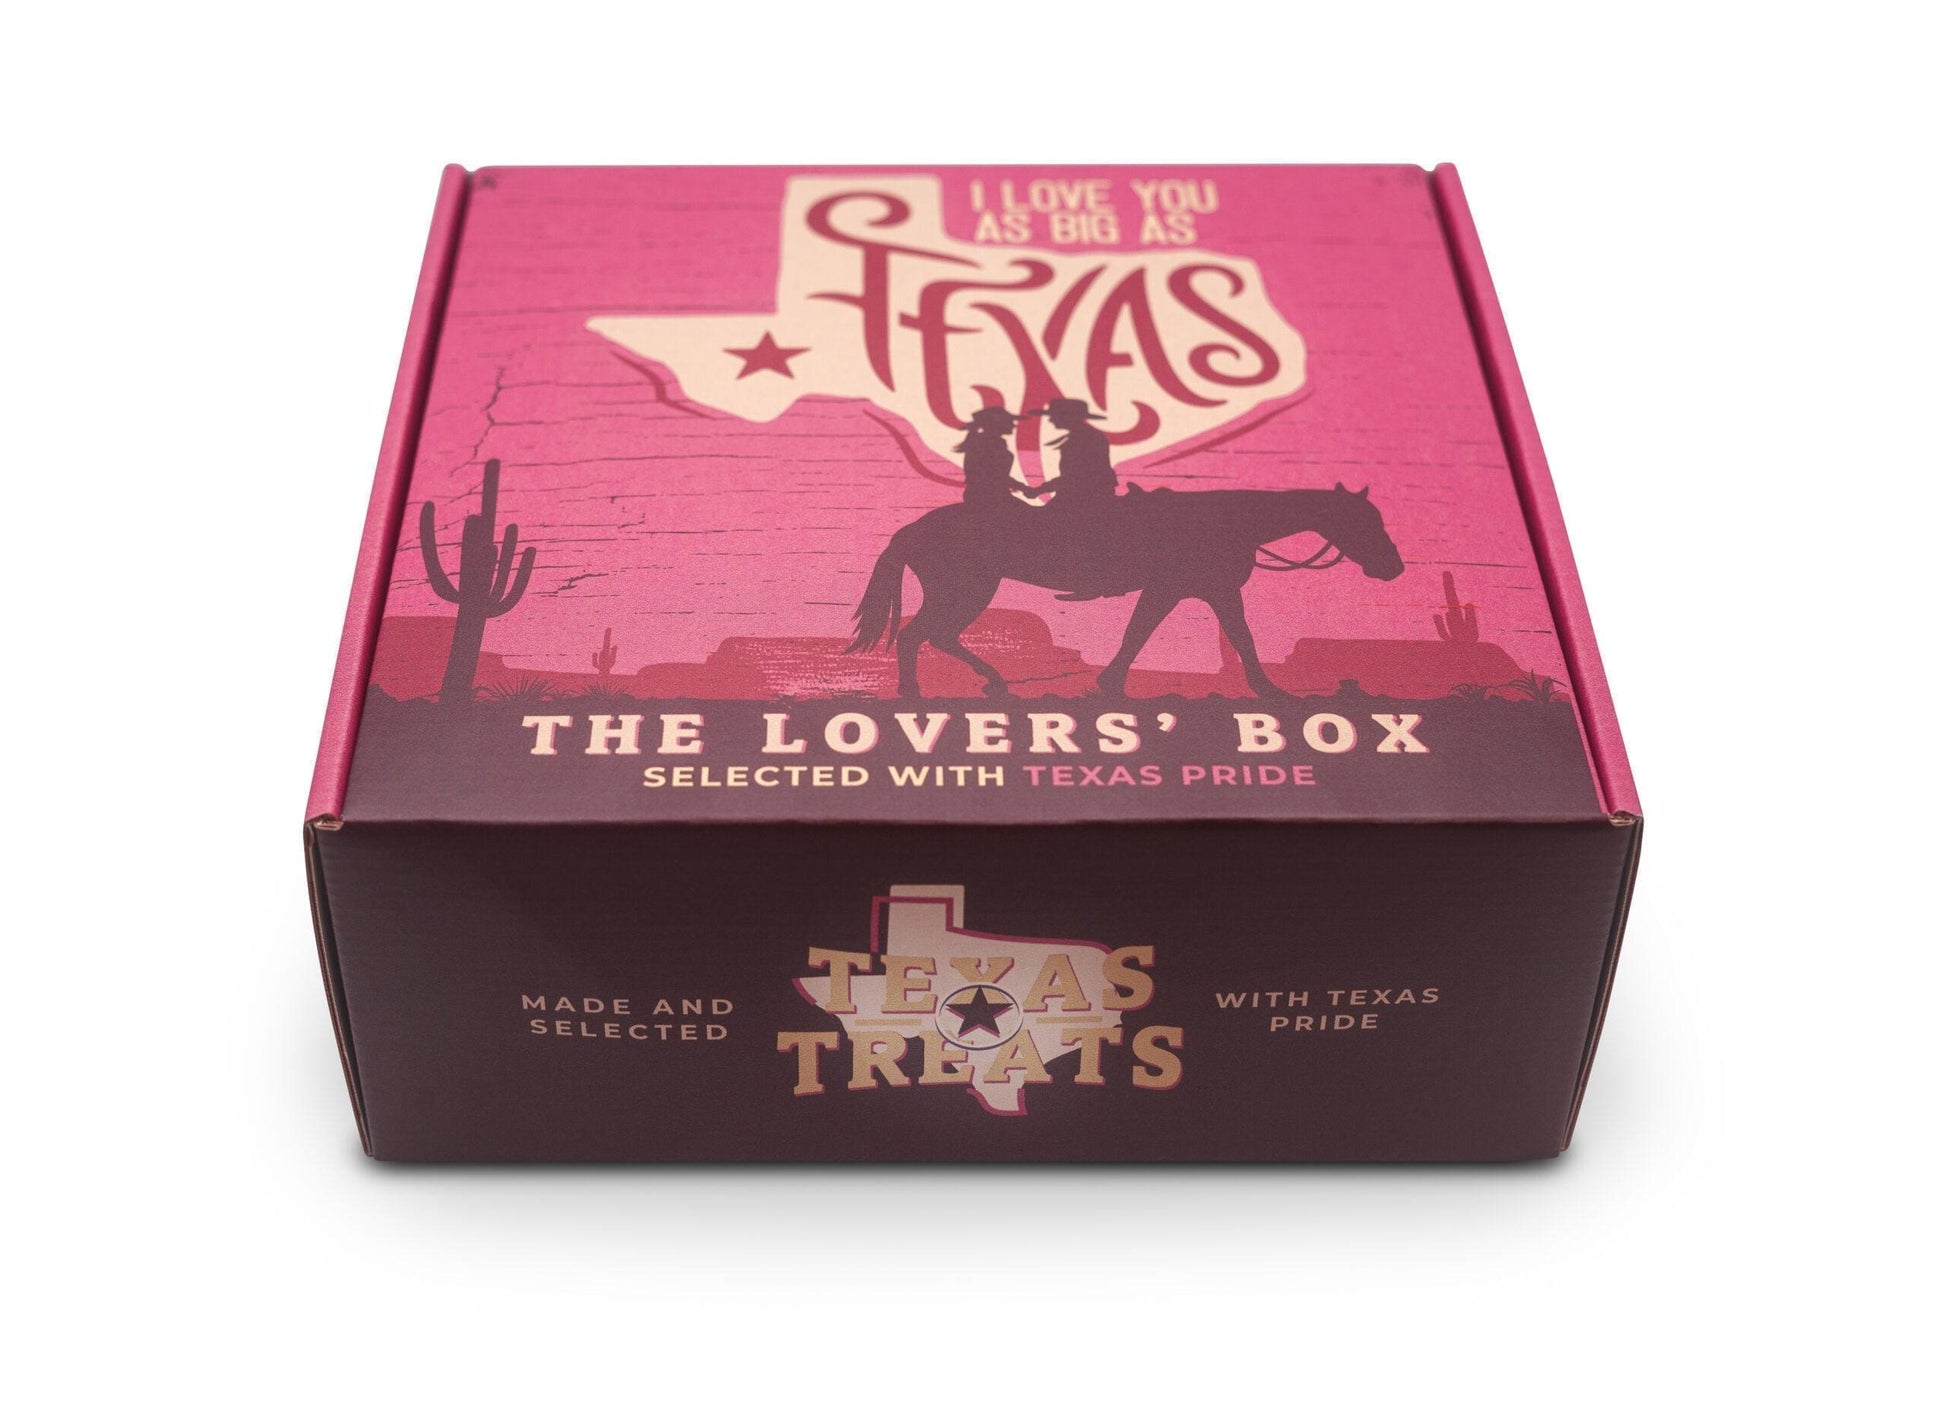 Texas Treats' Lovers gift box, available for custom corporate gifting and personal gifts.